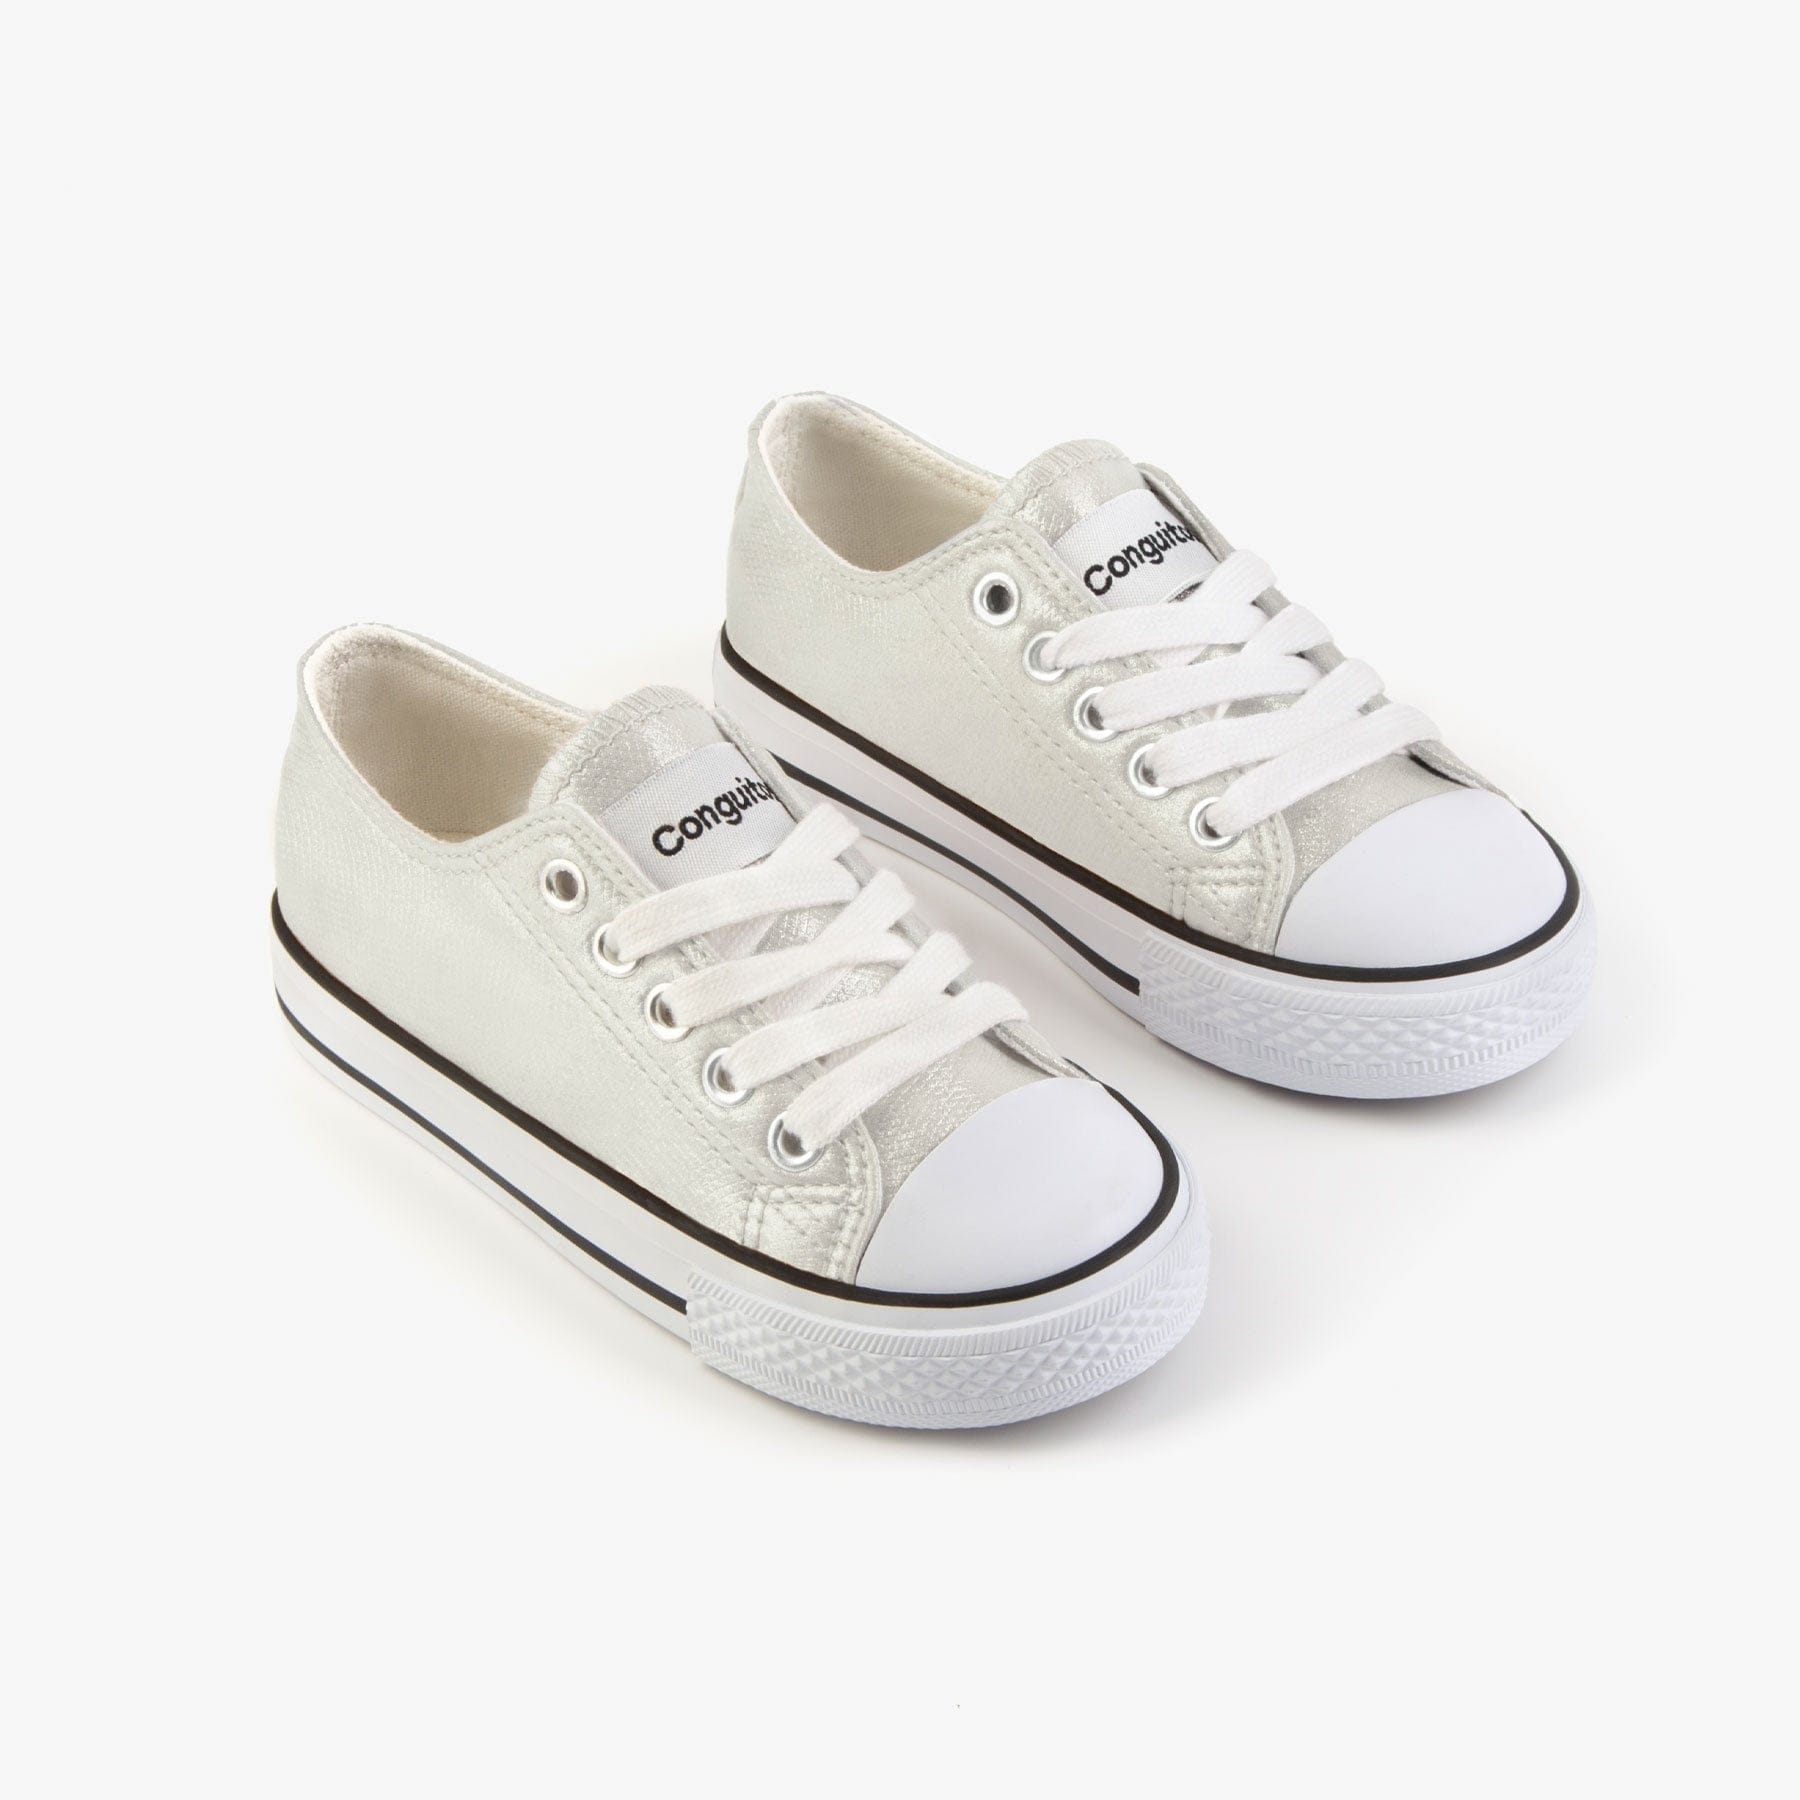 CONGUITOS Shoes Unisex Metallized Silver Sneakers